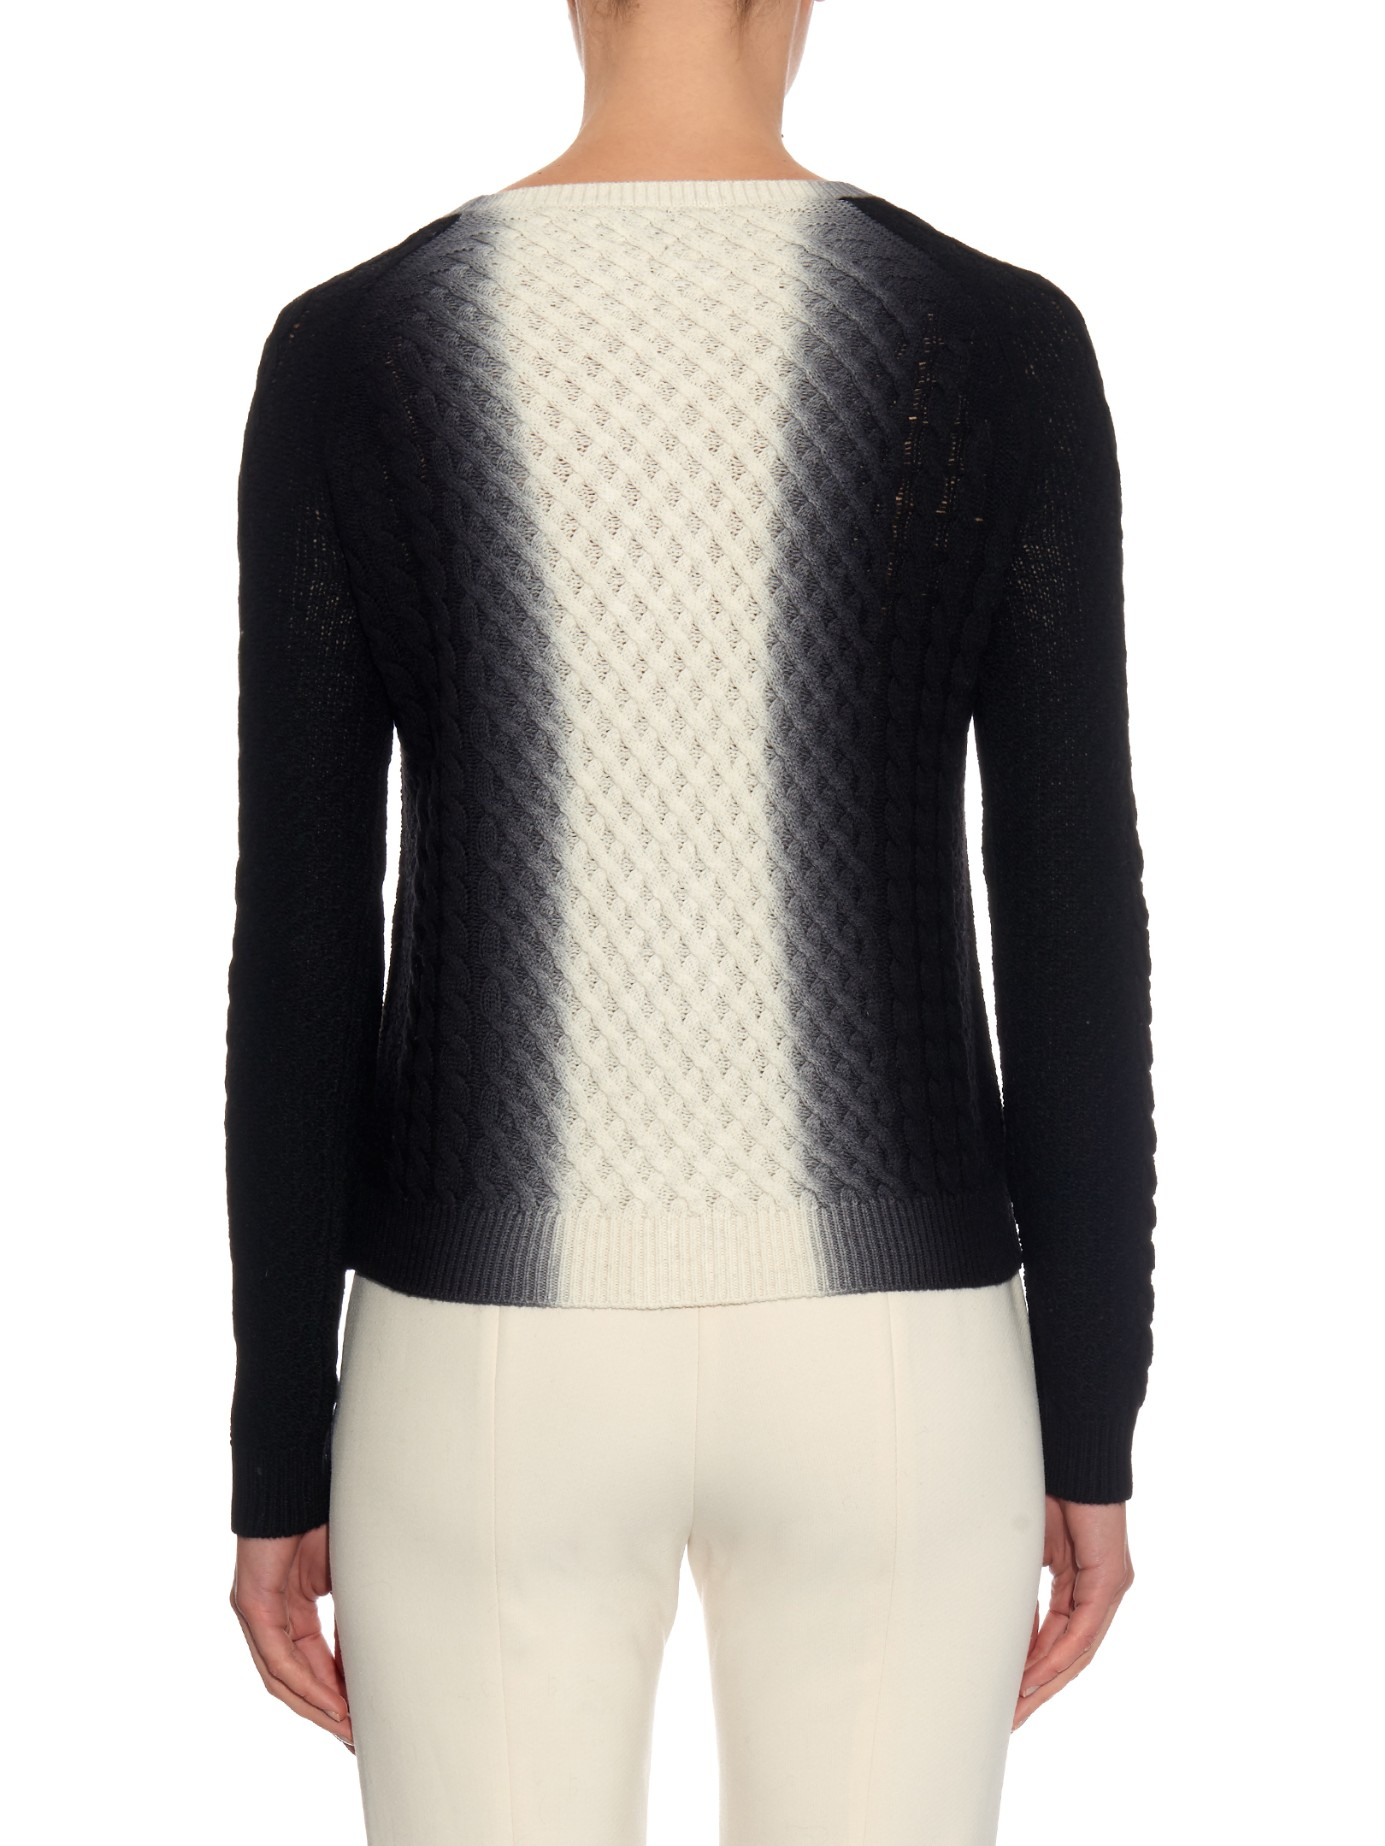 Vince Vertical Tie-dye Cable-knit Sweater in Black - Lyst